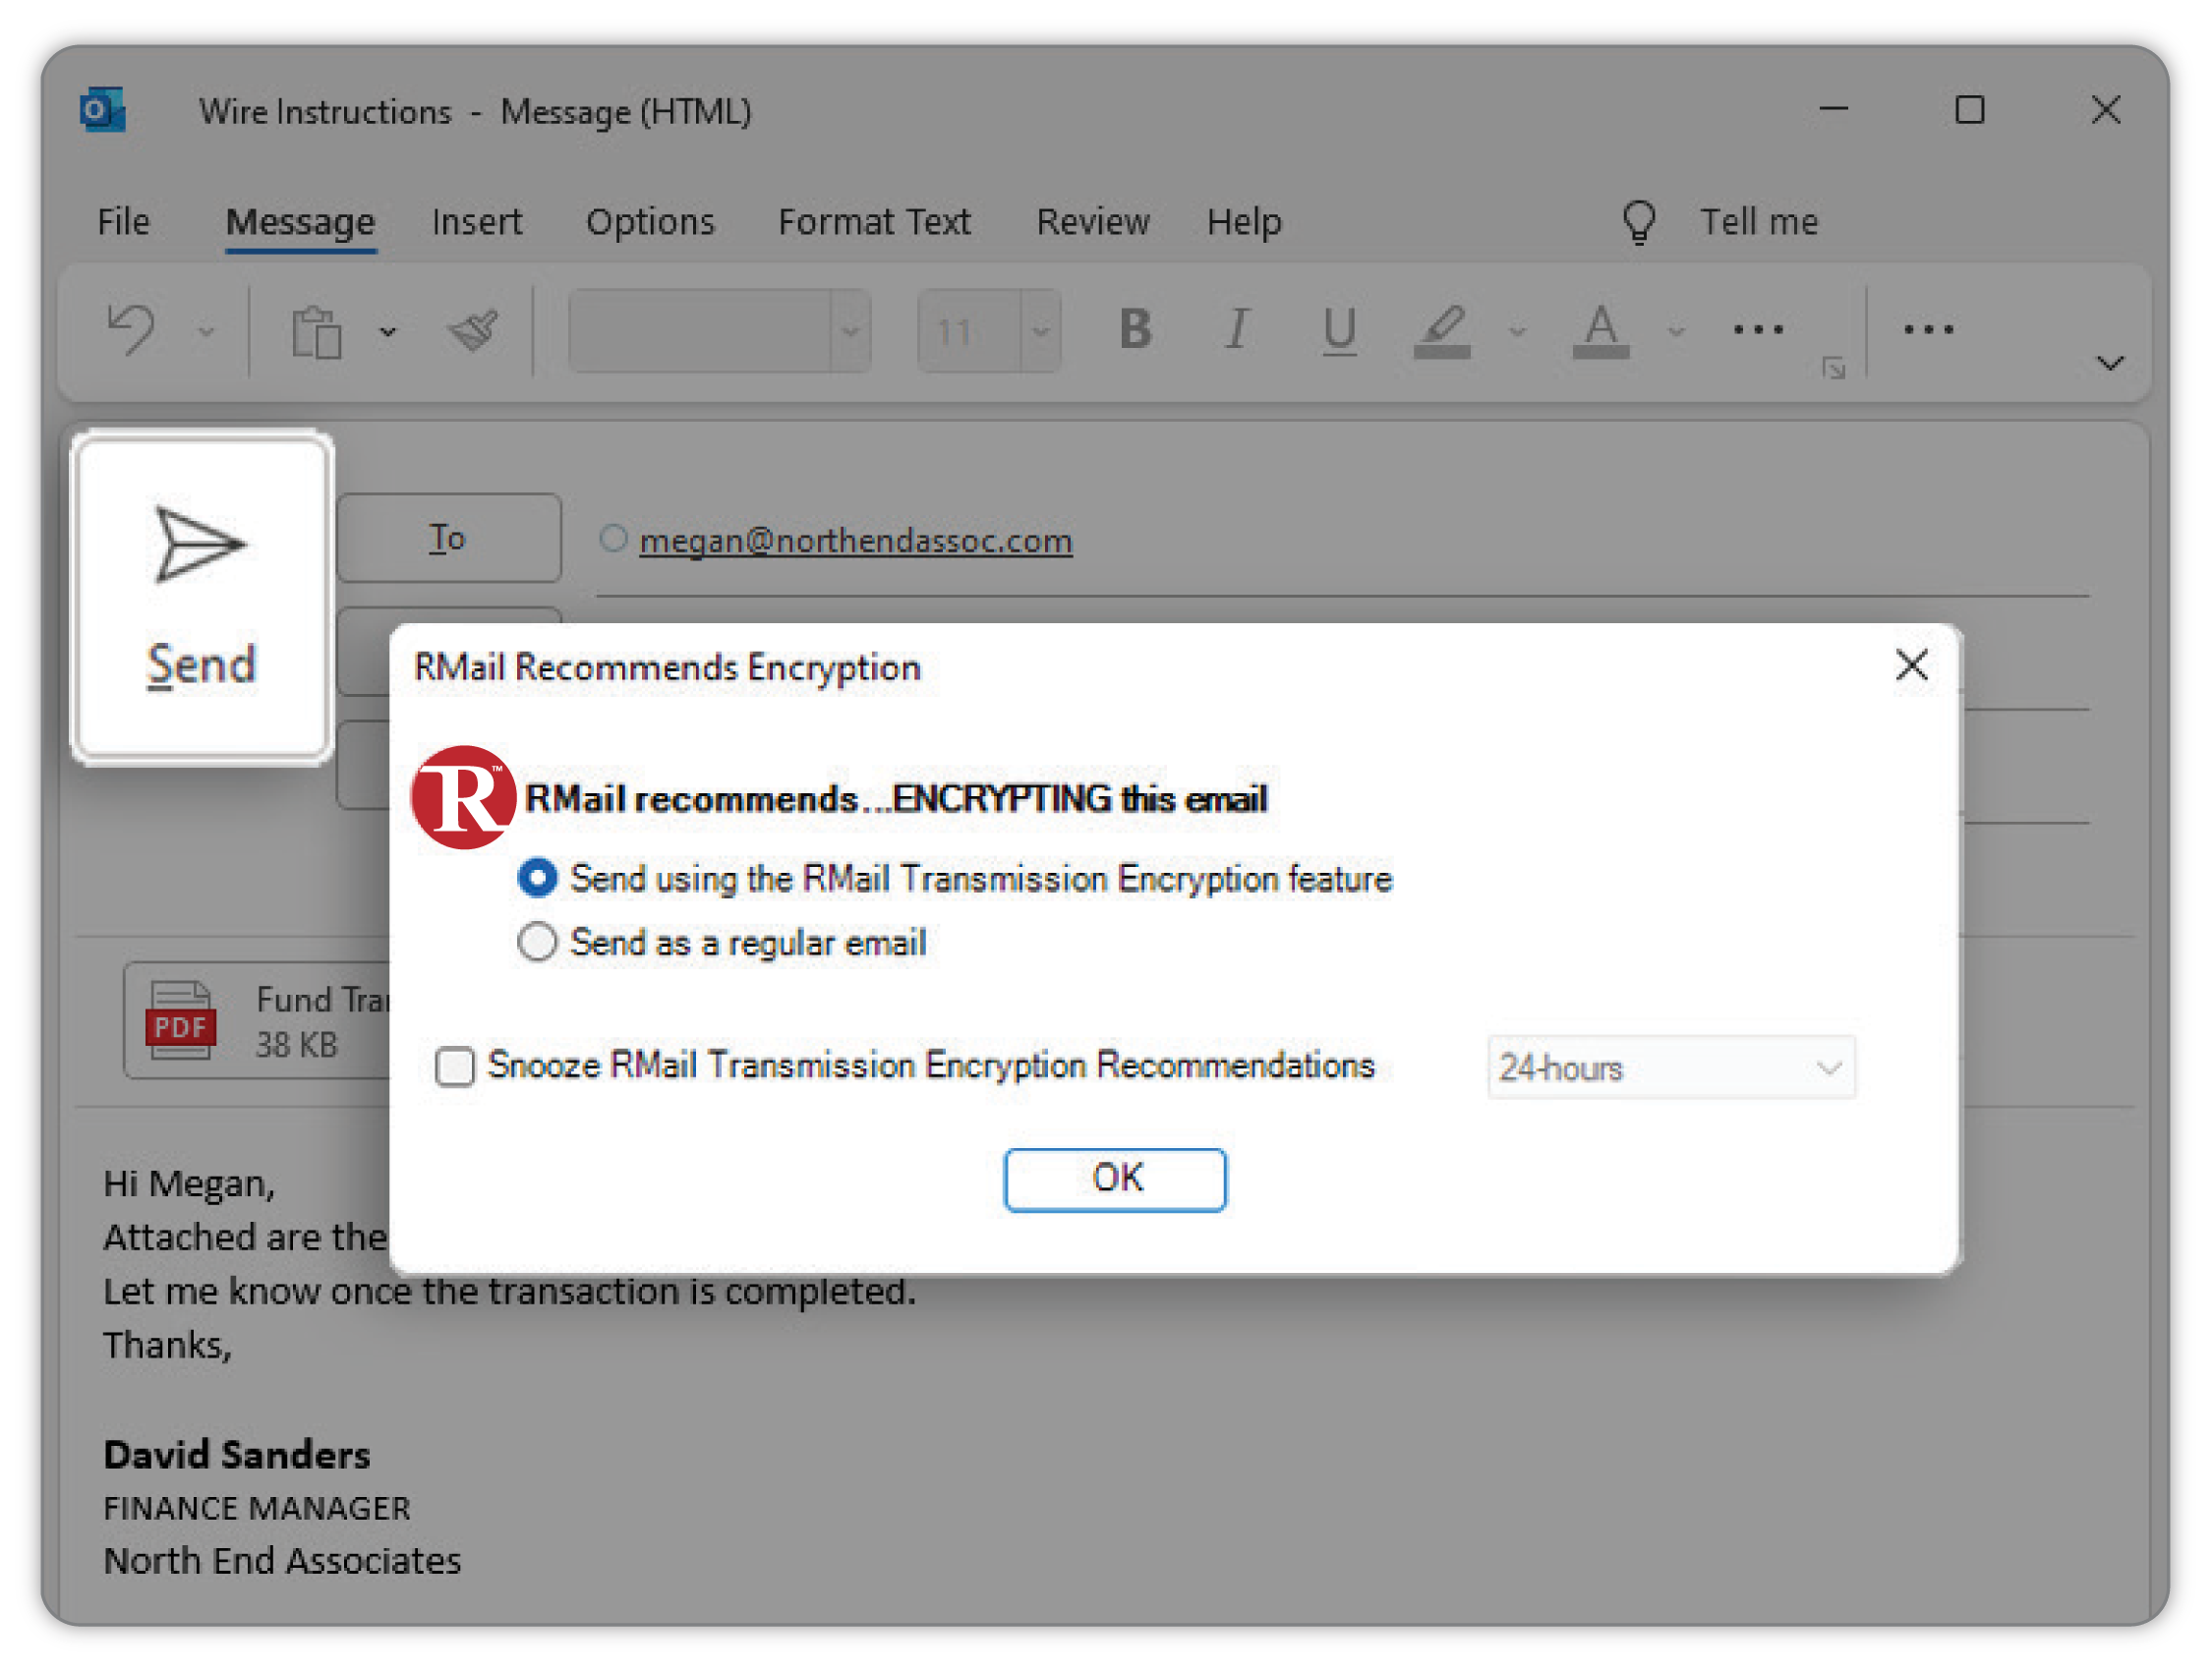 Encrypted emails from RMail